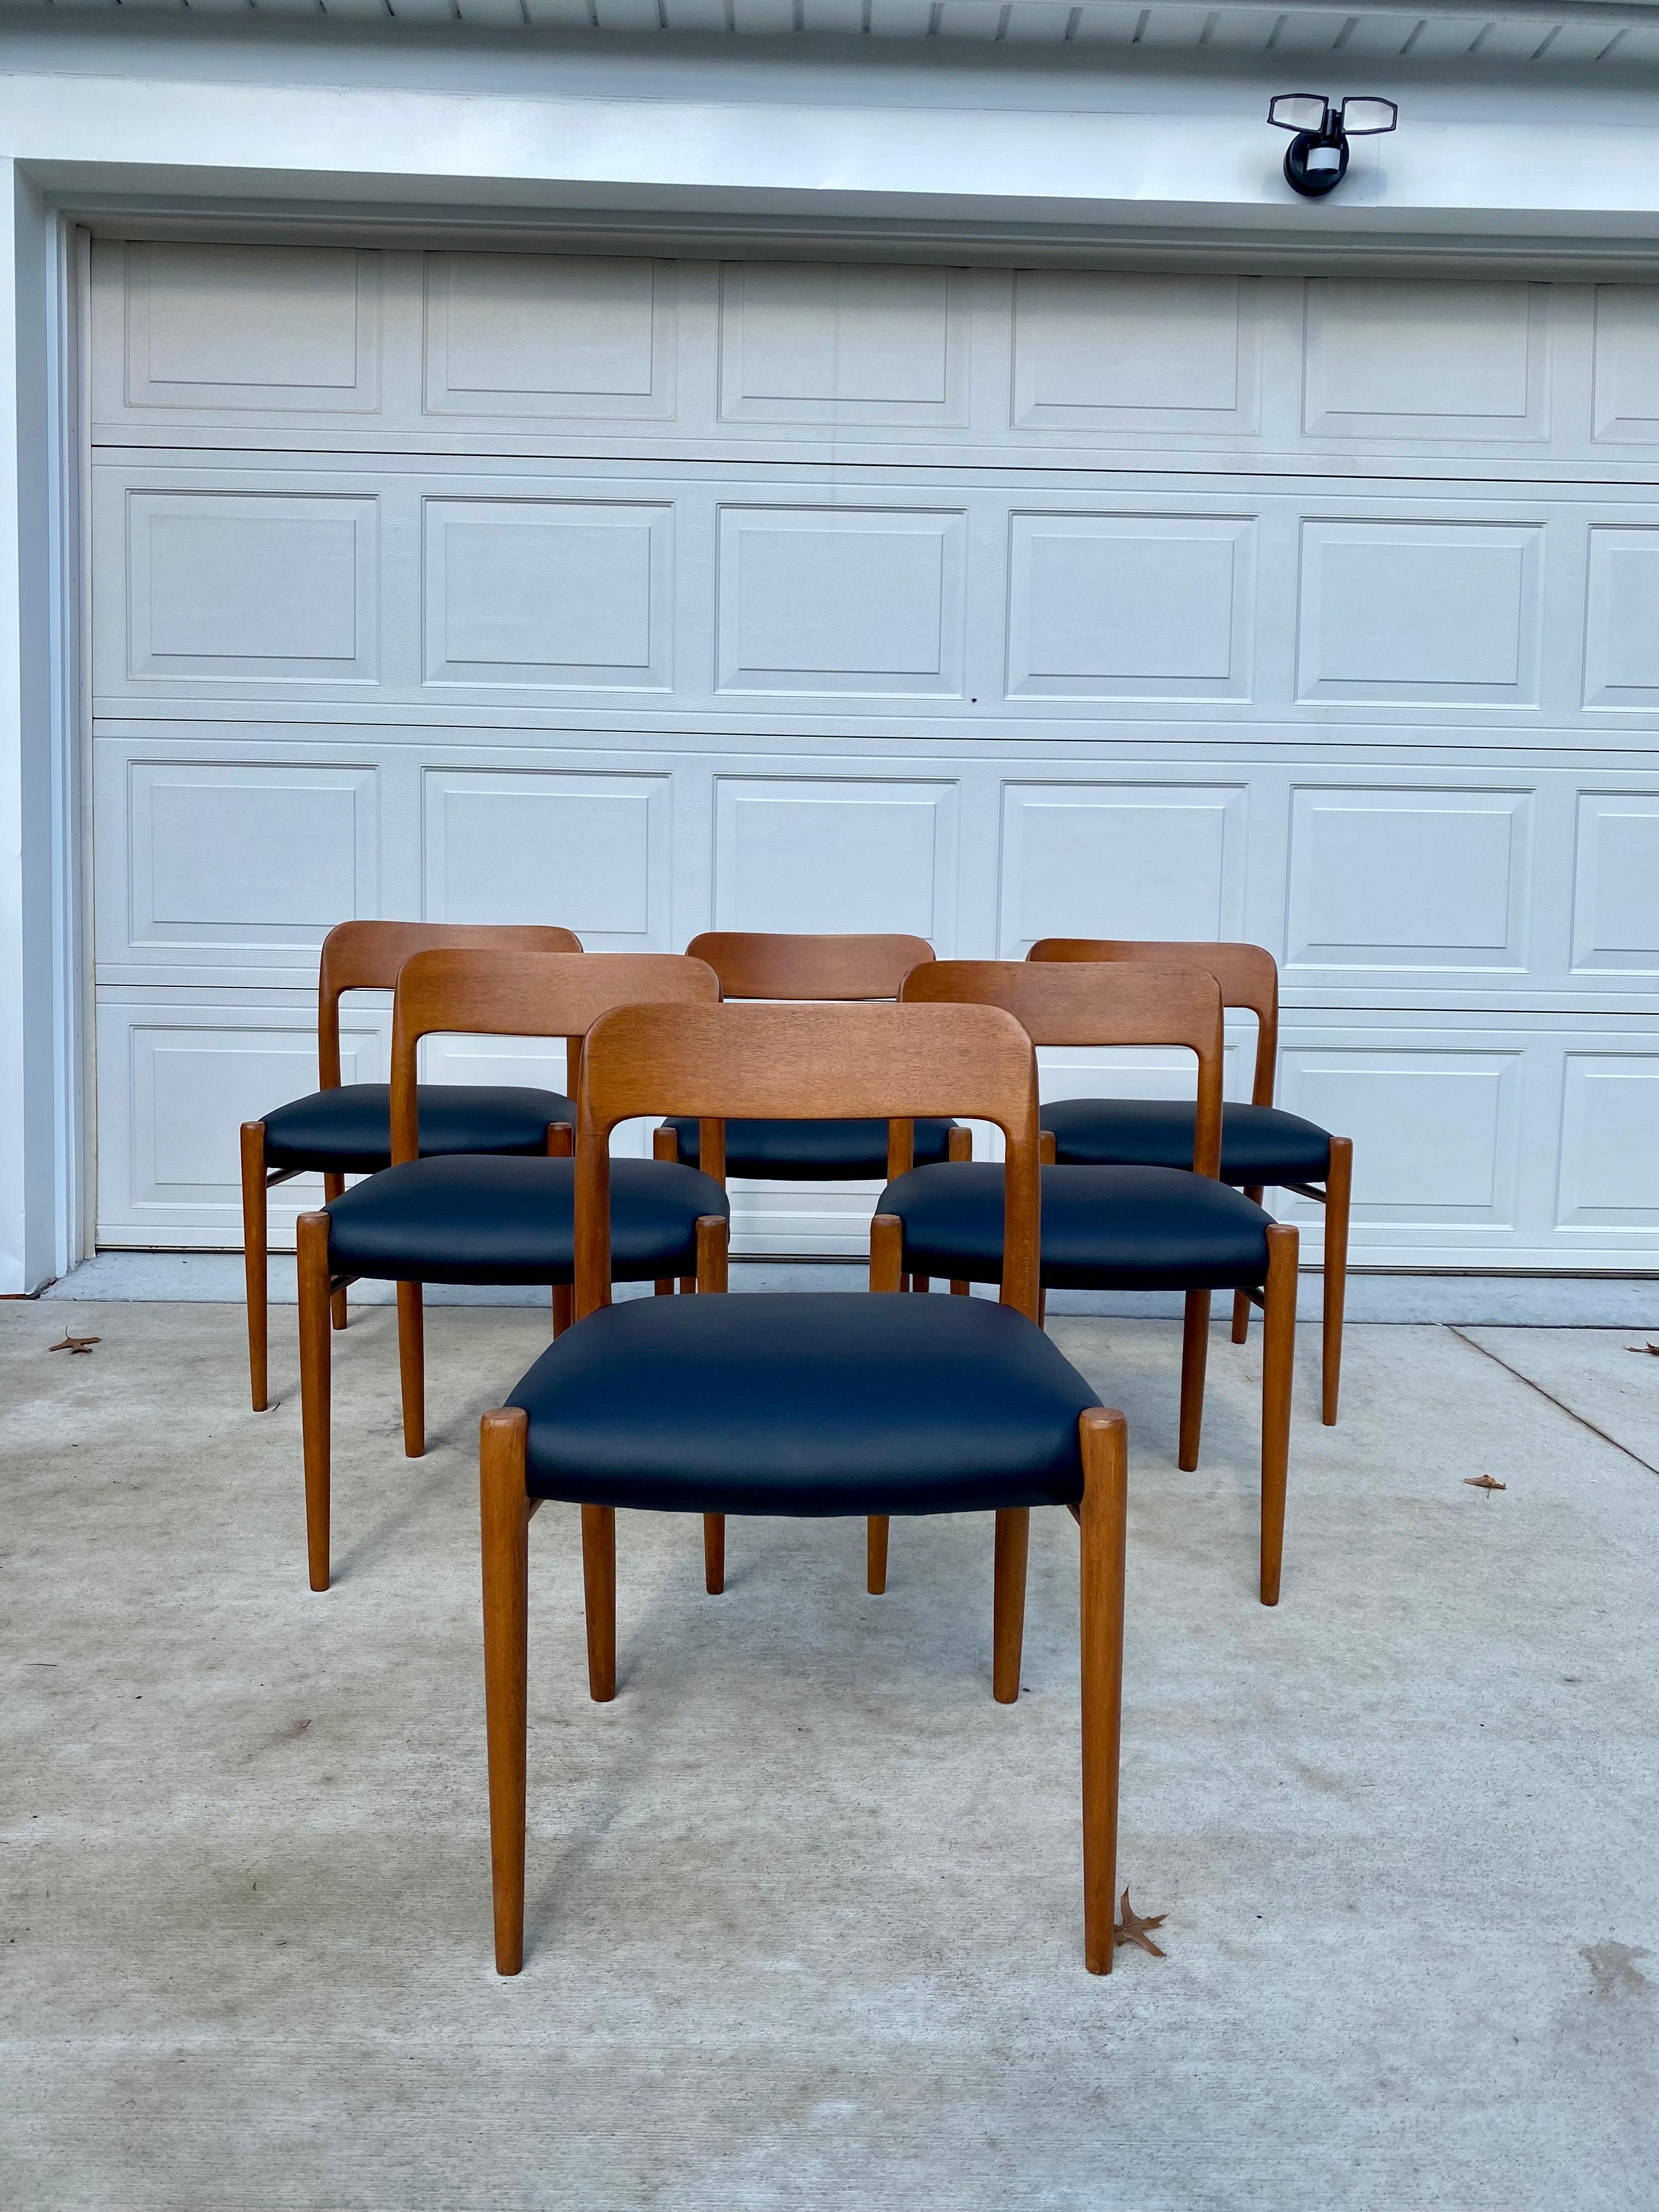 Beautiful set of 6 Niels Moller mod. 75 chairs for J.L. Moller, Denmark. This set has been fully refinished with new lacquer to bring out the teak color. Originally these chairs had rope seating but because of damage, it has been reupholstered in a